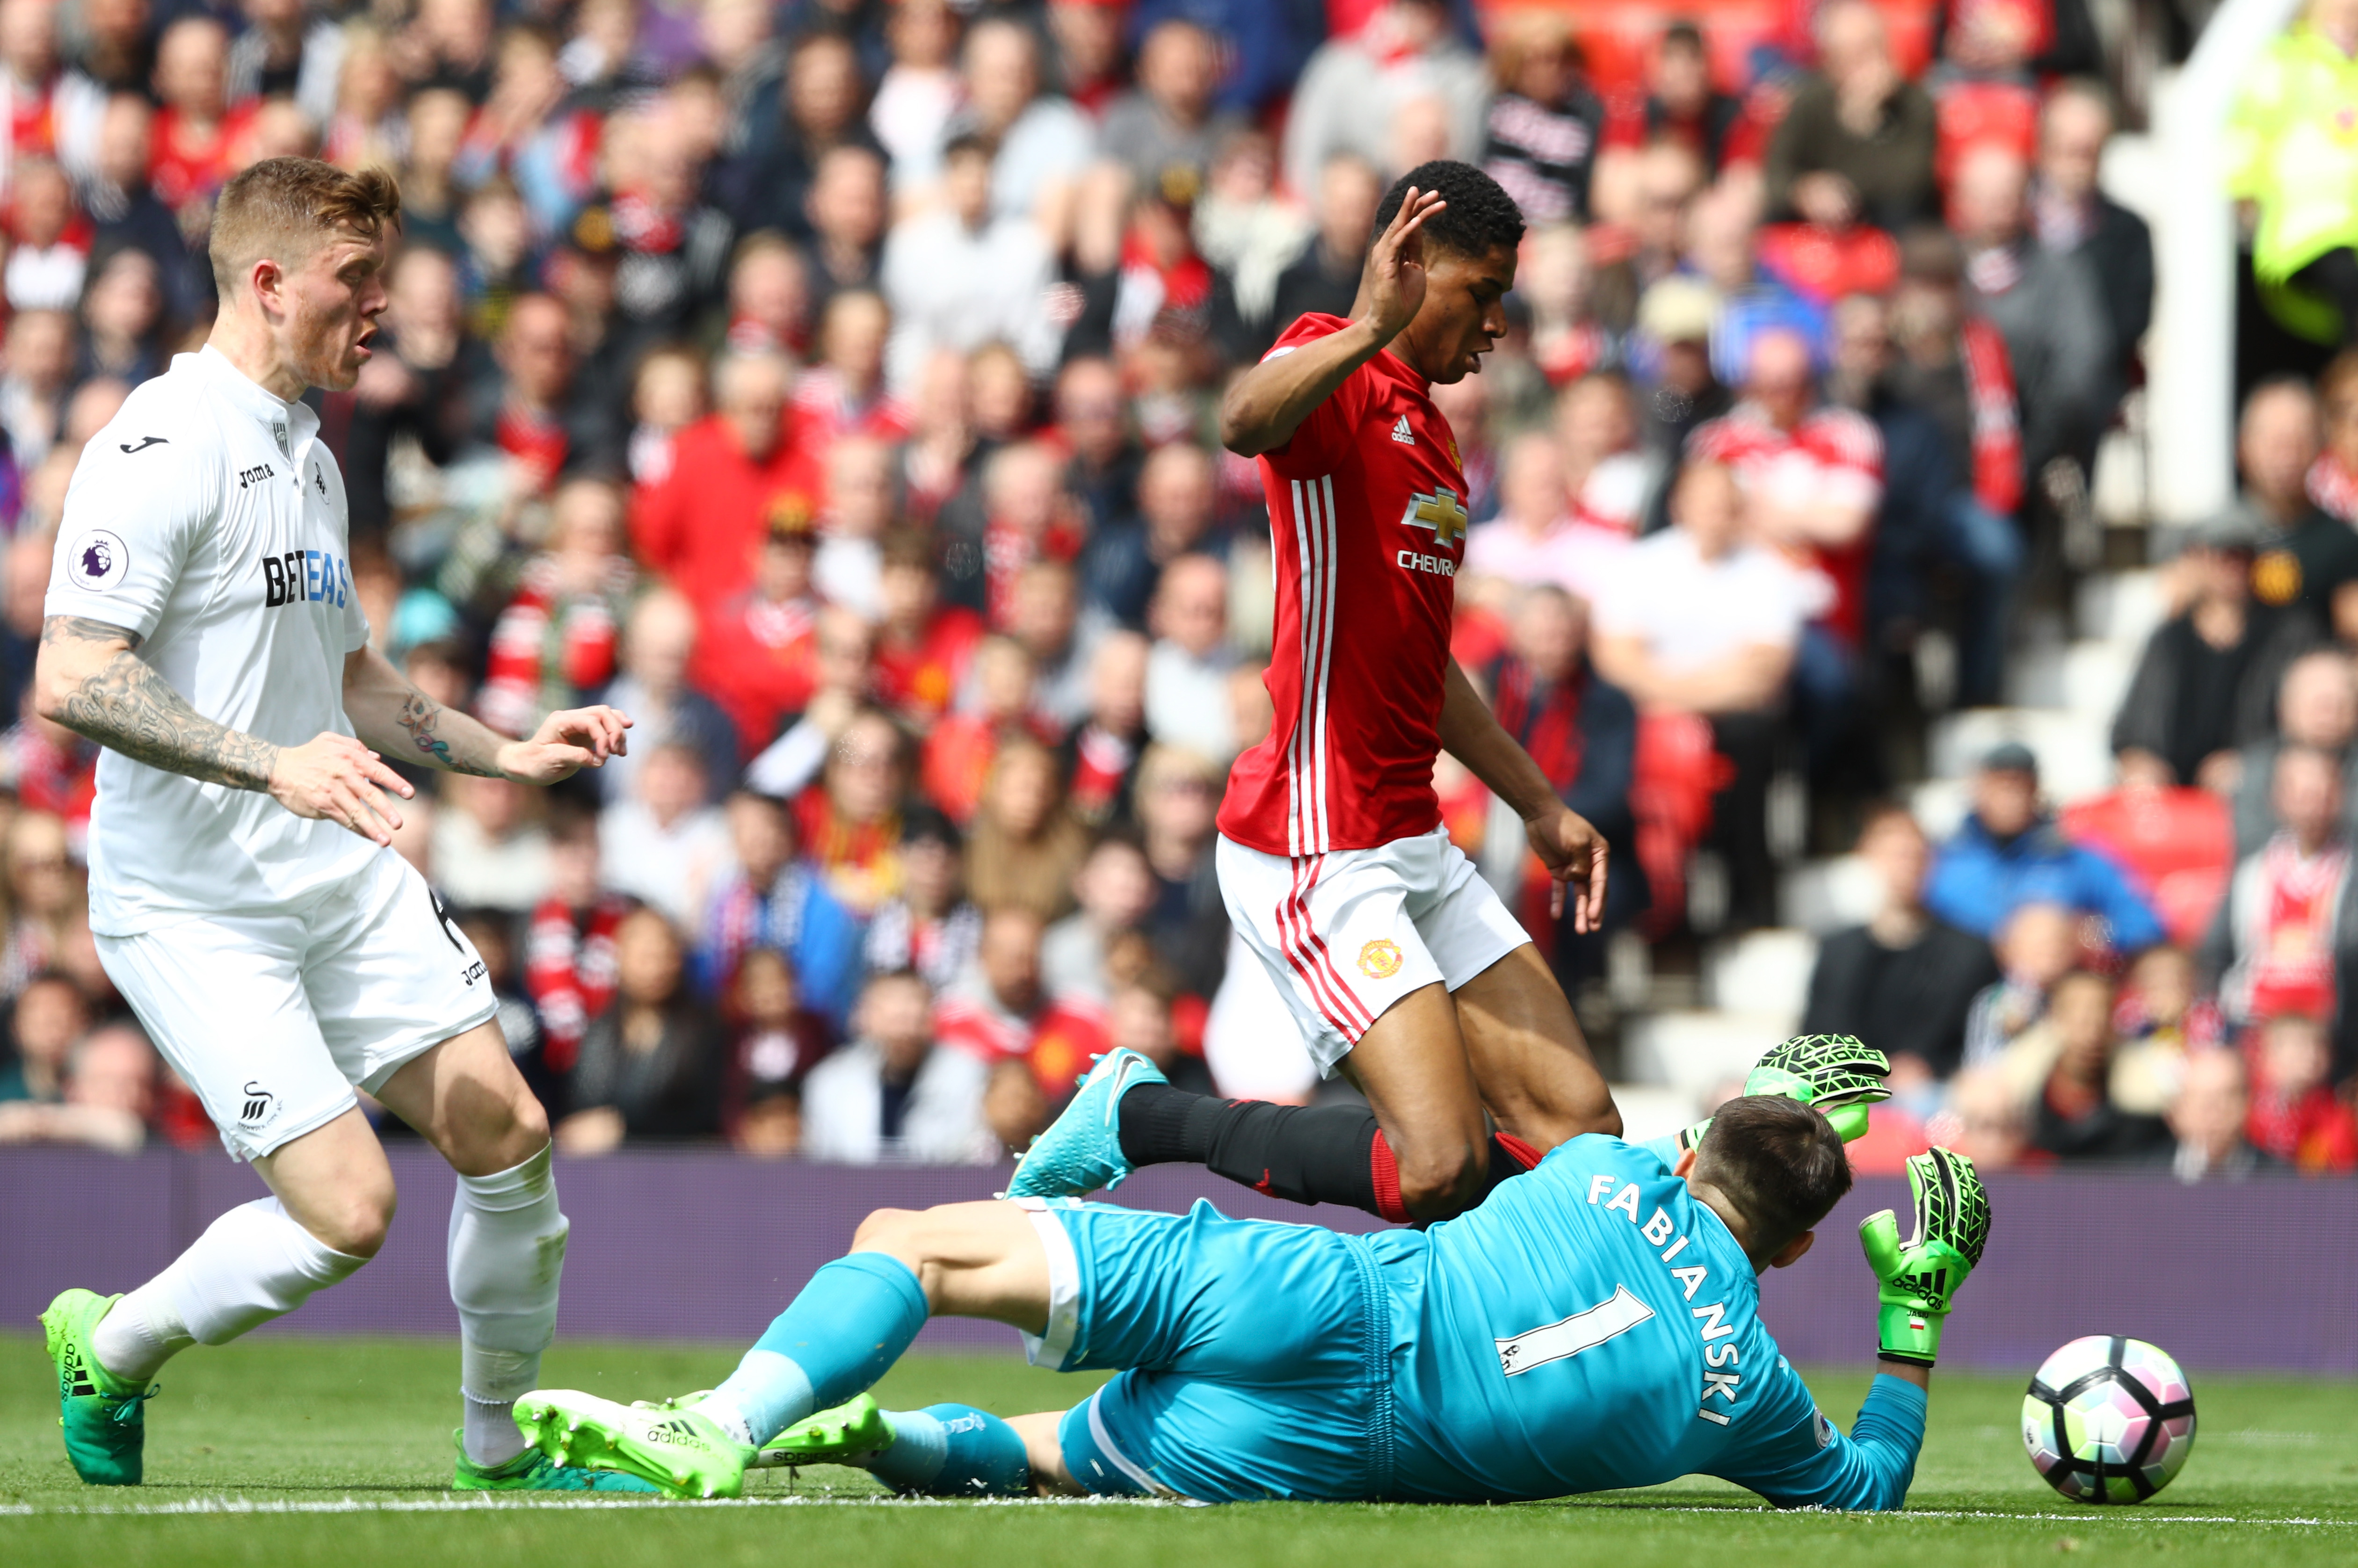 MANCHESTER, ENGLAND - APRIL 30:  Marcus Rashford of Manchester United is fouled by Lukasz Fabianski of Swansea City and a penalty is awarded to Manchester United during the Premier League match between Manchester United and Swansea City at Old Trafford on April 30, 2017 in Manchester, England.  (Photo by Michael Steele/Getty Images)